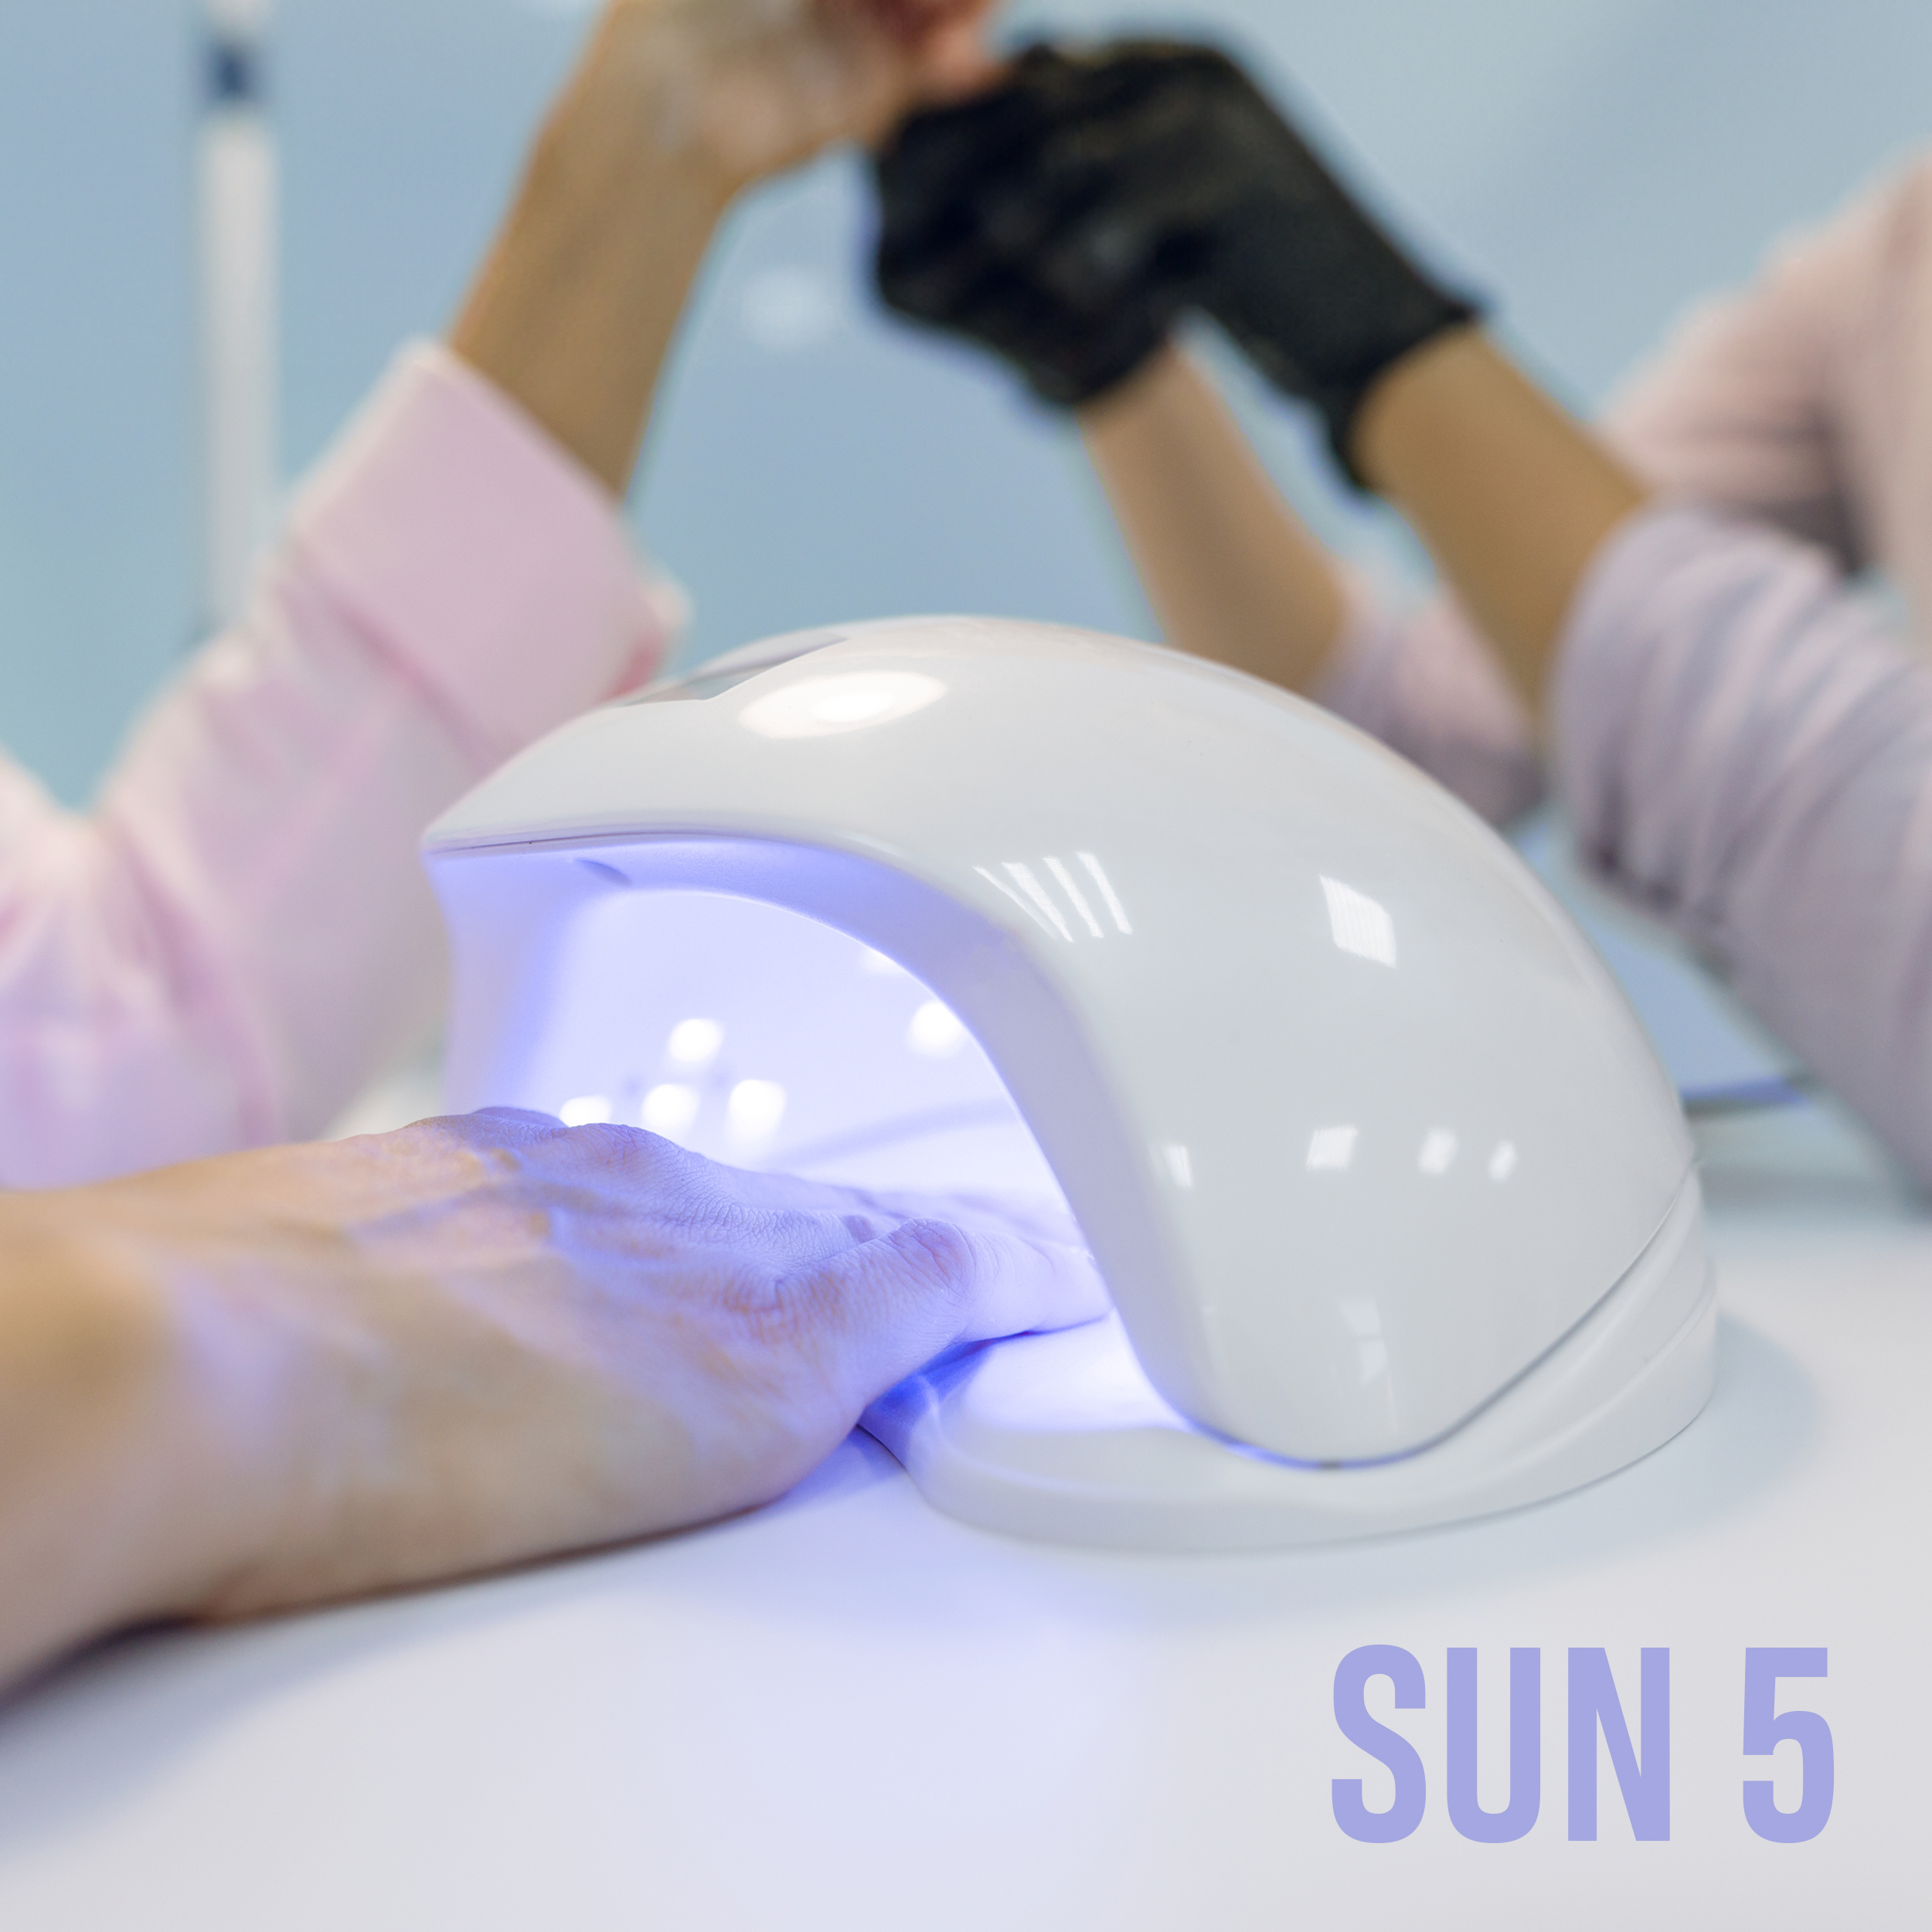 SUN 5 48W UV LED nail lamp with digital display and sensor: top quality of the latest generation